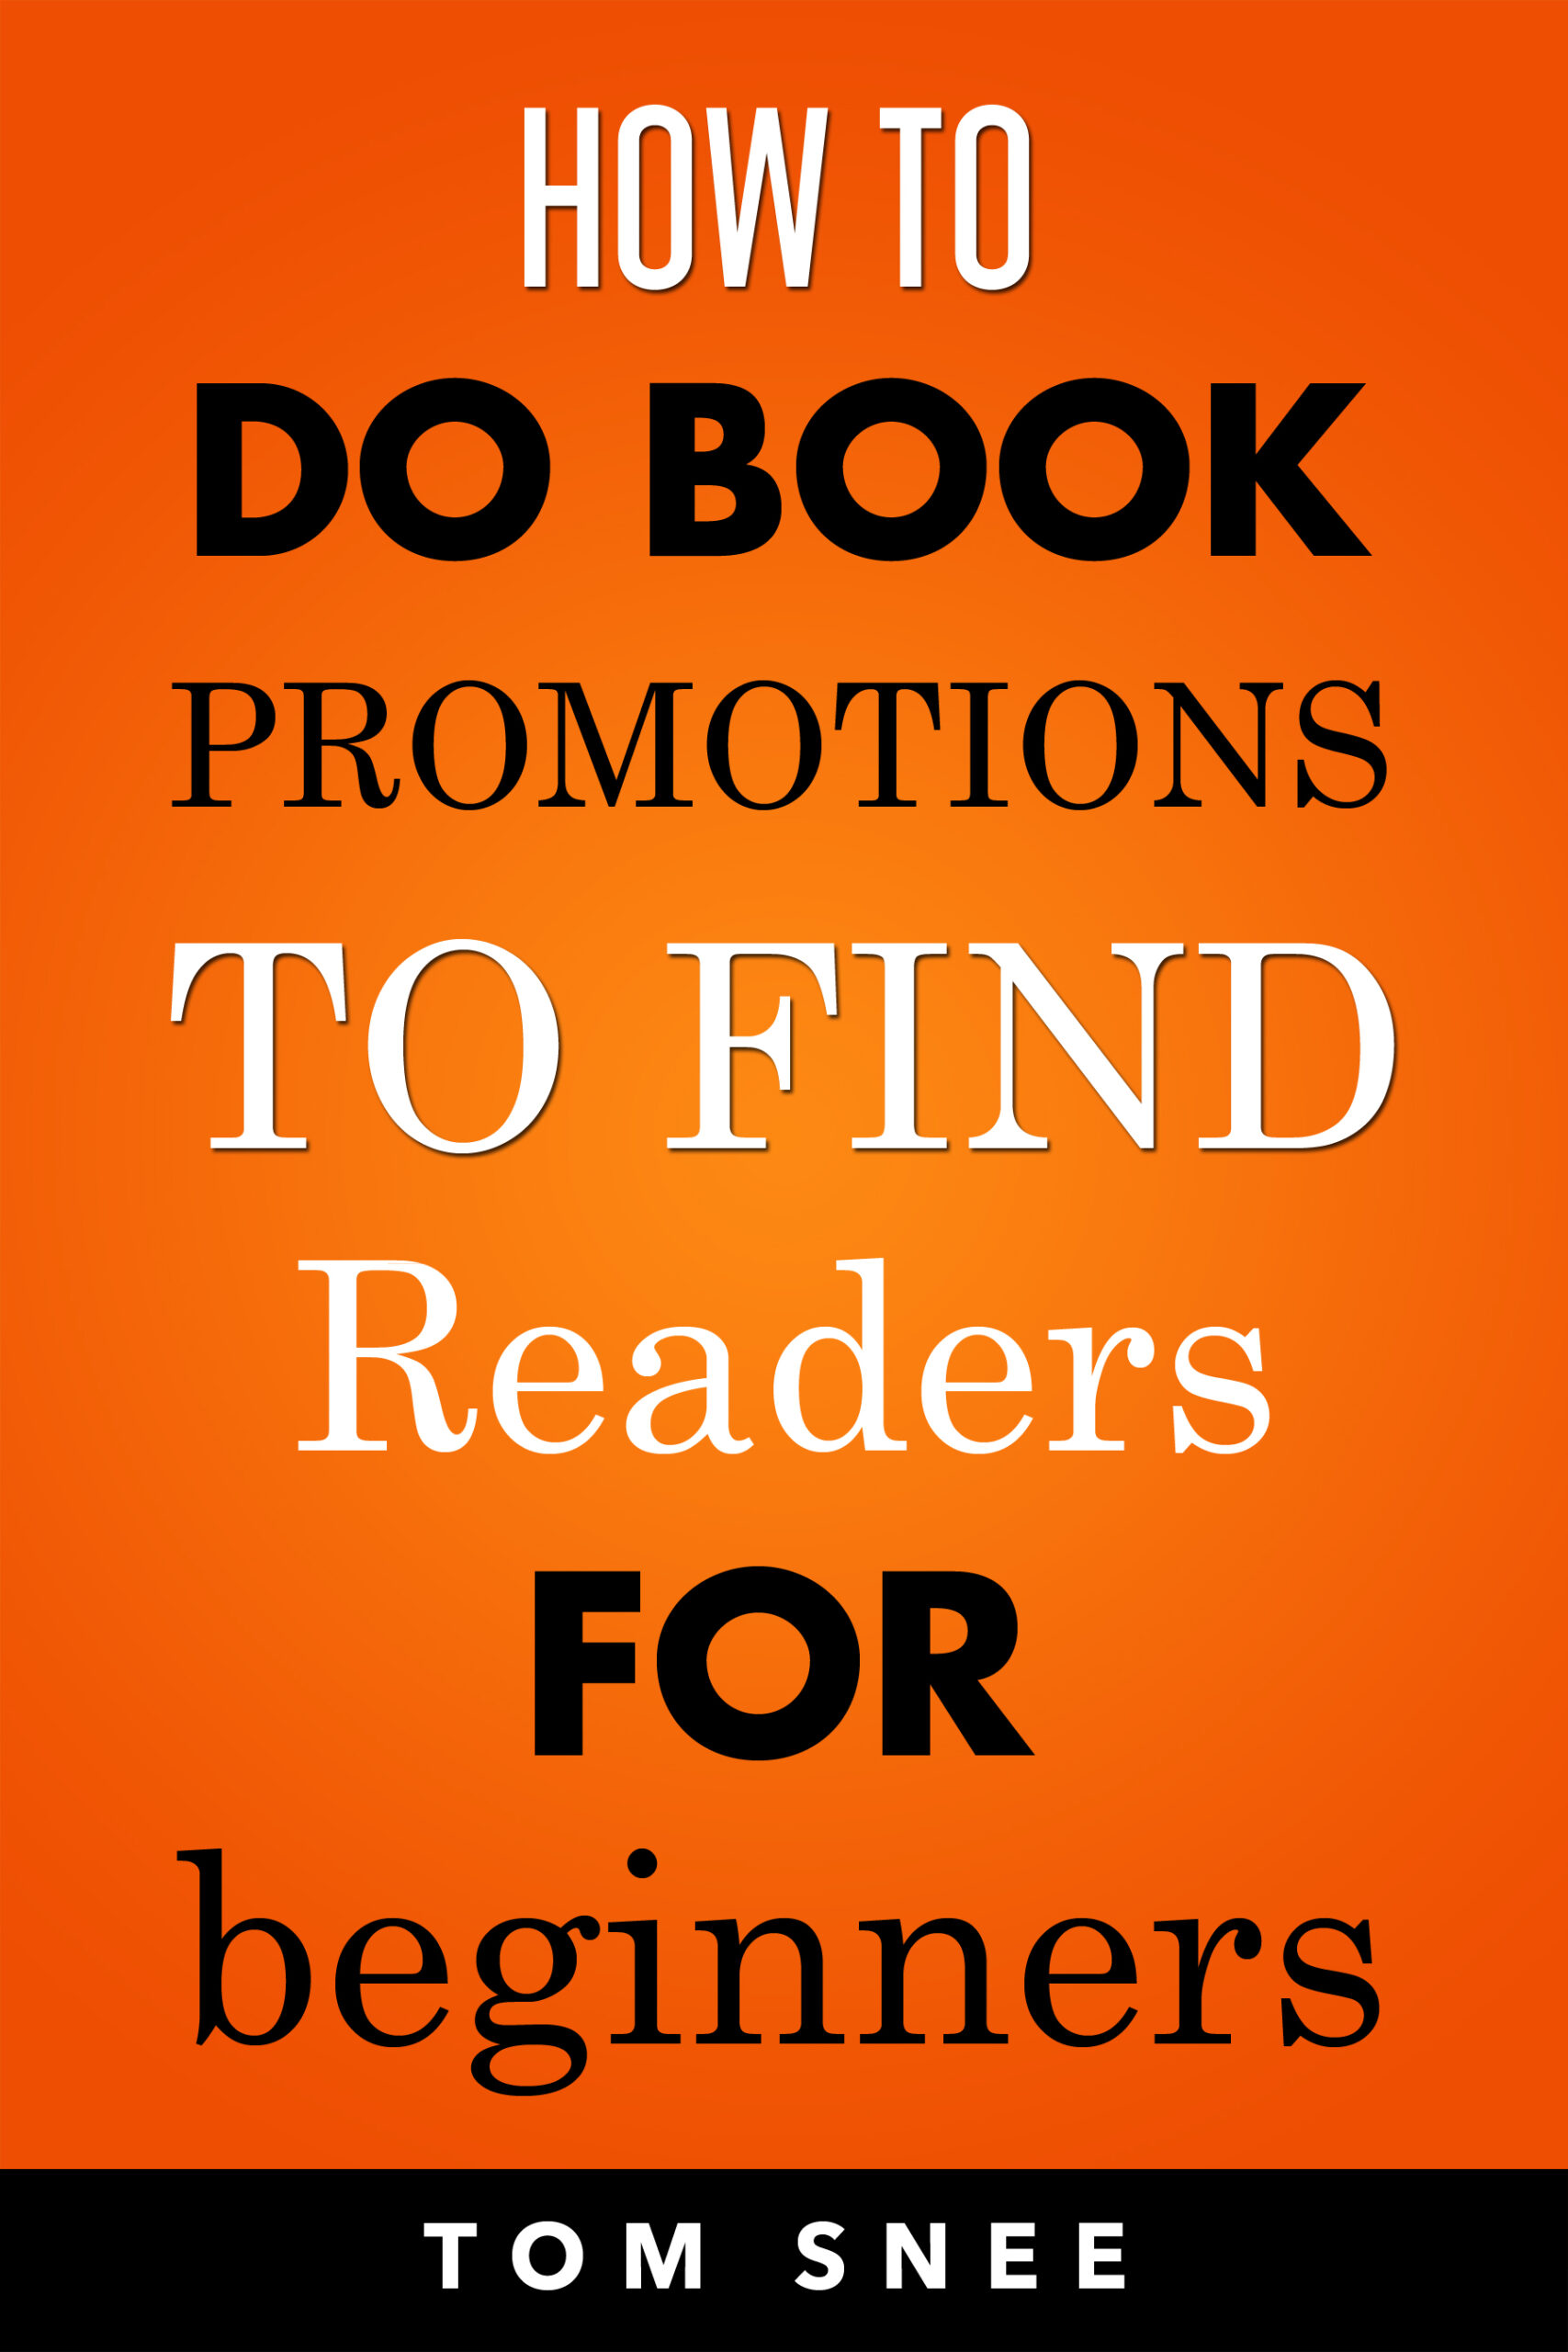 FREE: How to Do Book Promotions to Find Readers for Beginners by Tom Snee